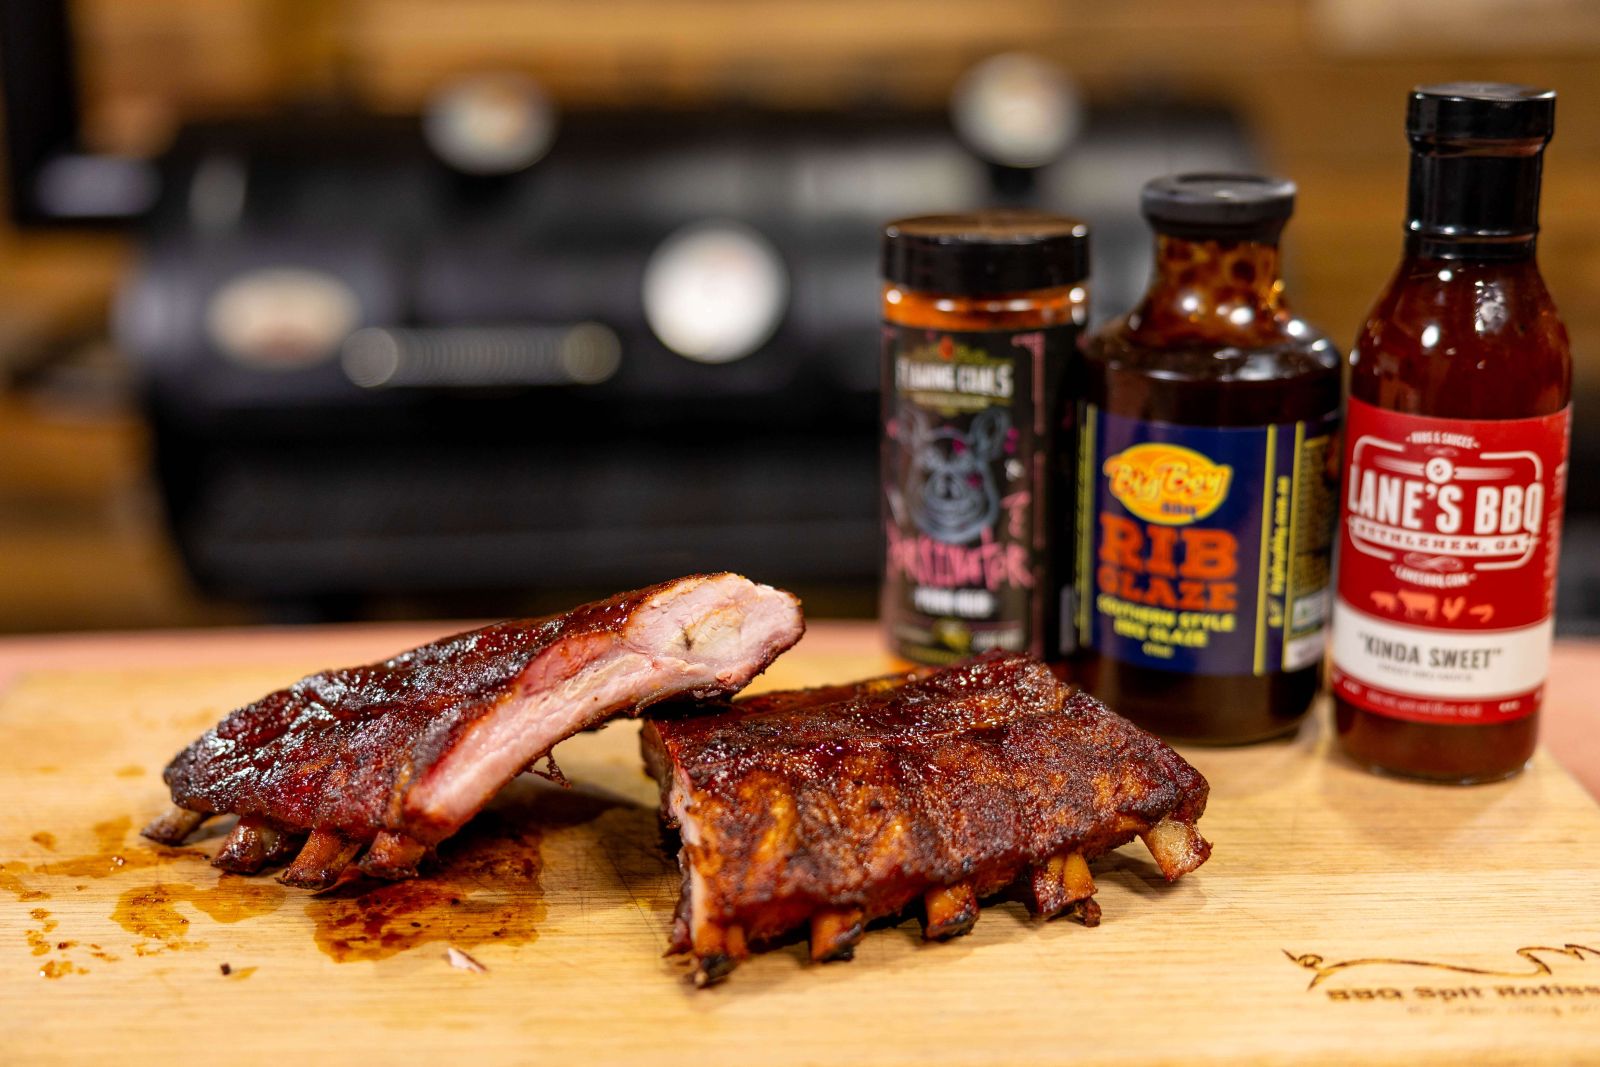 This_image_shows_Pork_ribs_with_rubs_and_sauces